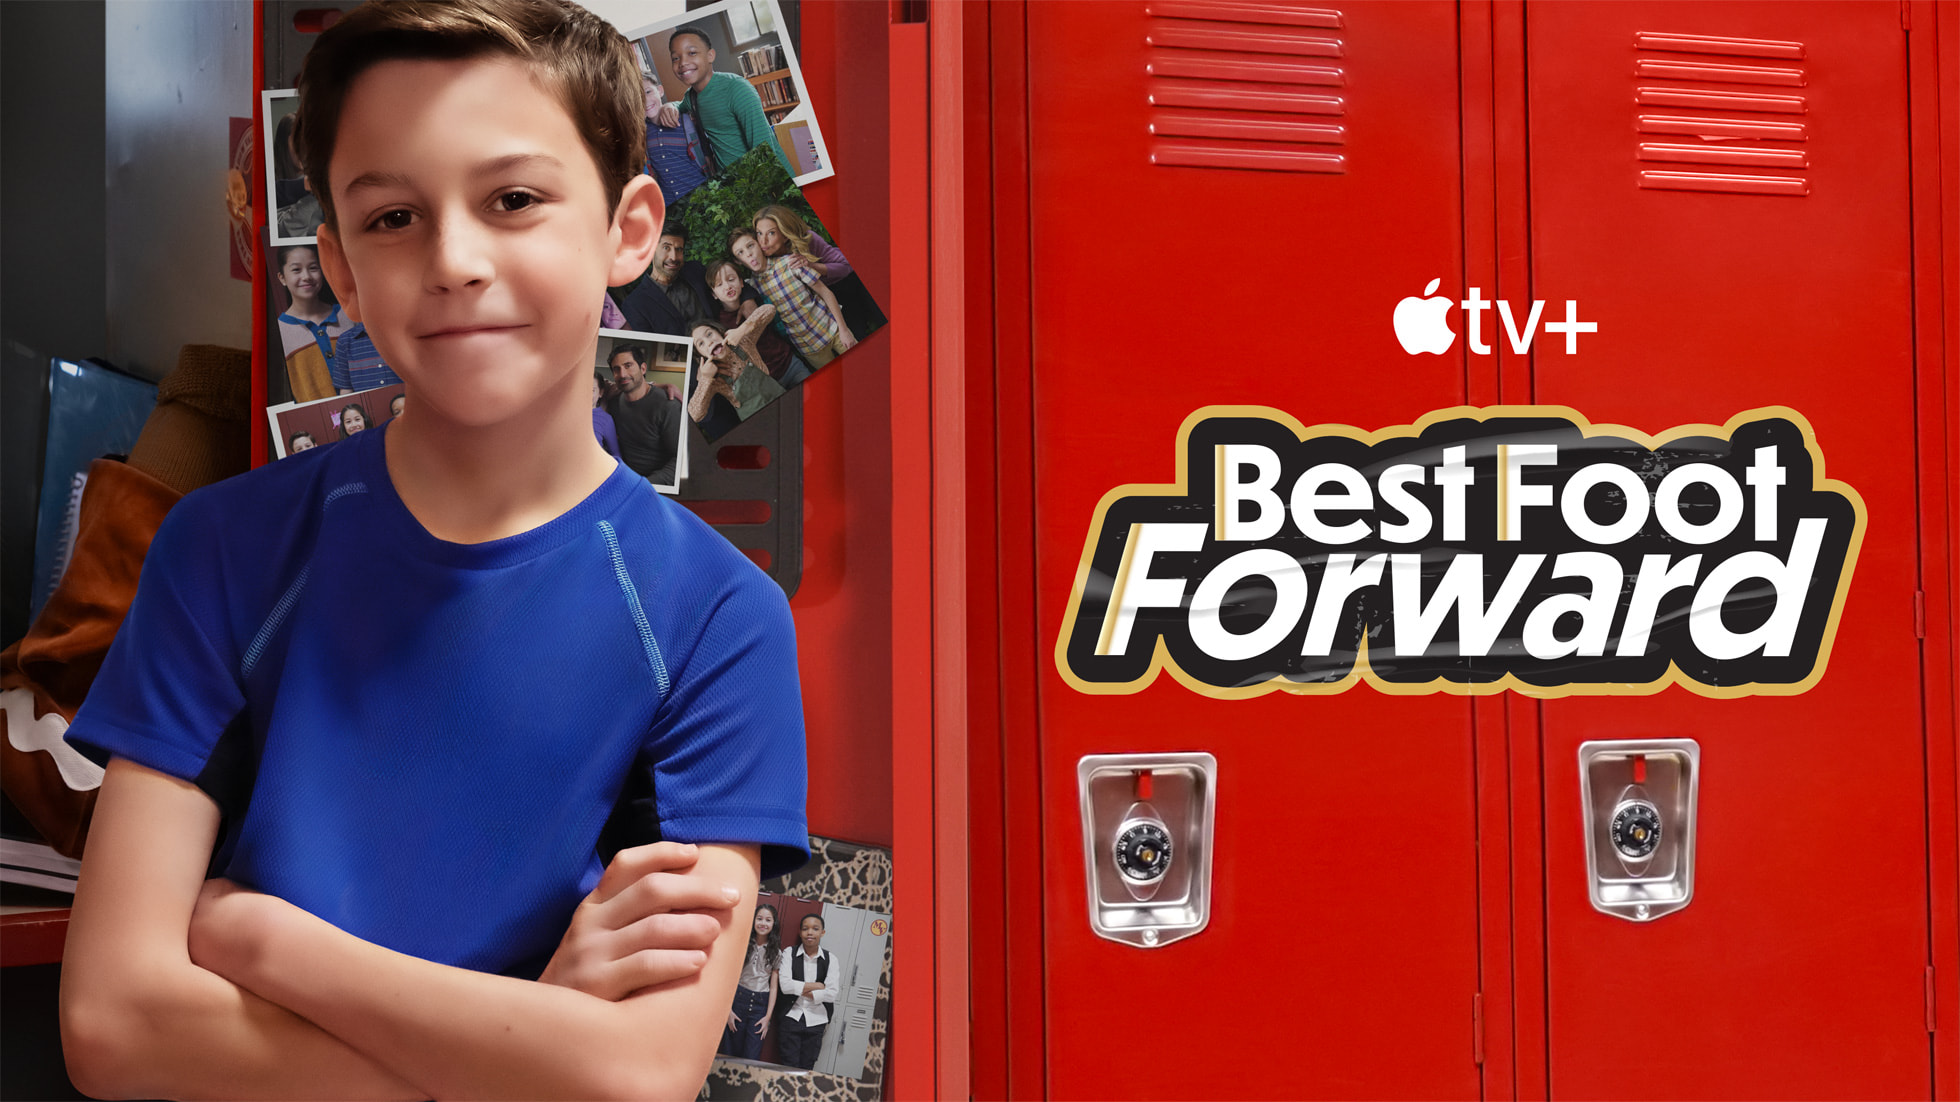 Apple TV+ debuts trailer for the charming new family comedy “Best Foot Forward,” premiering globally on Friday, July 22.